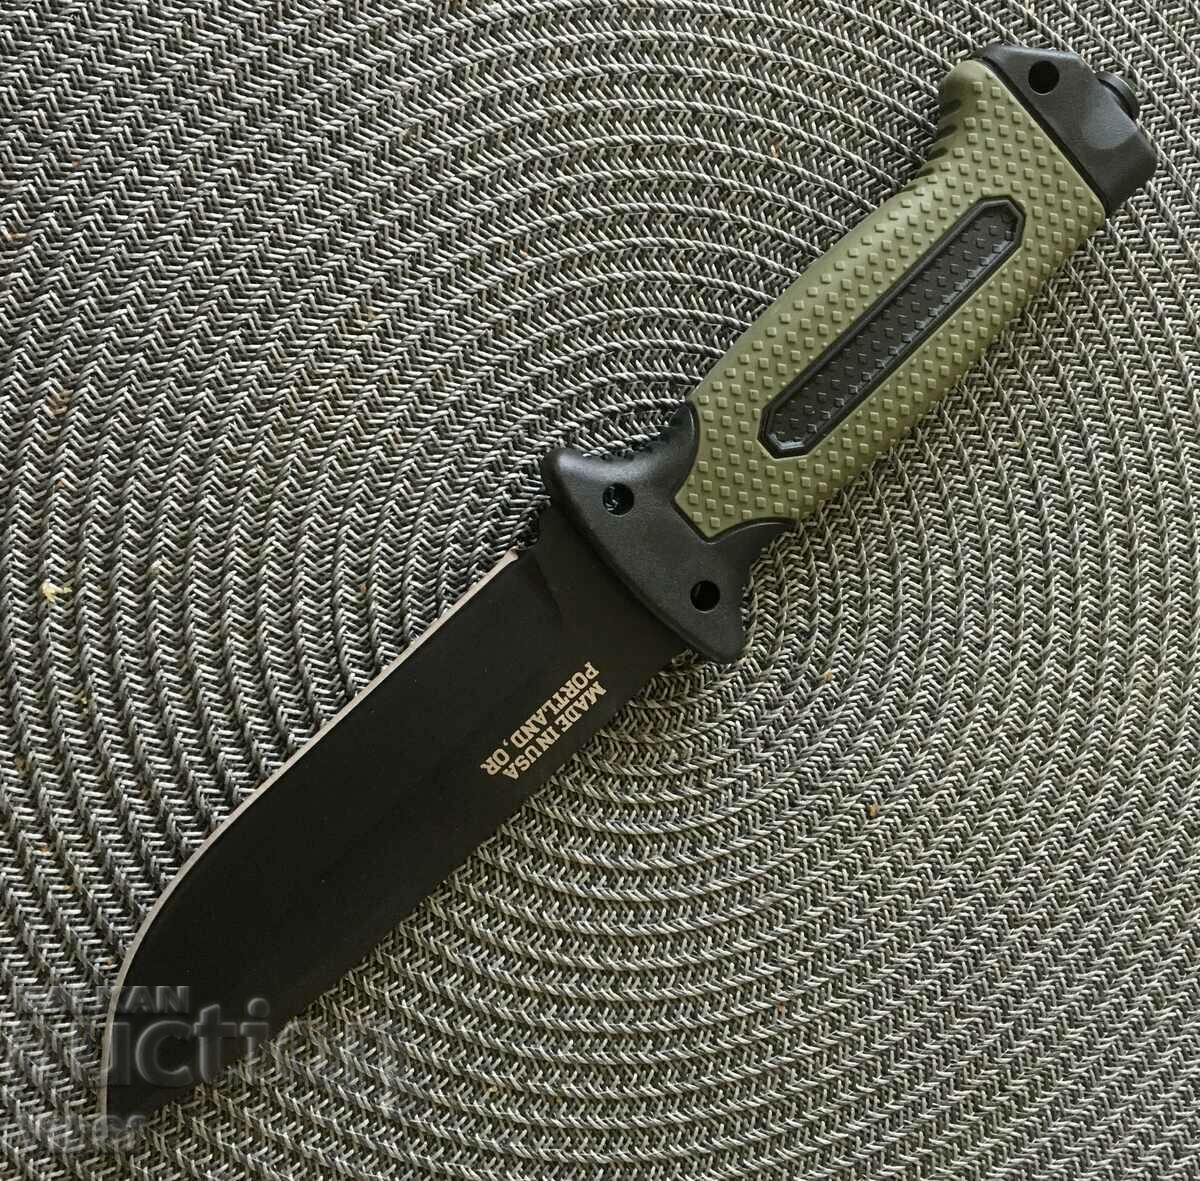 Tactical knife with magnesium lighter, diamond stick, whistle/